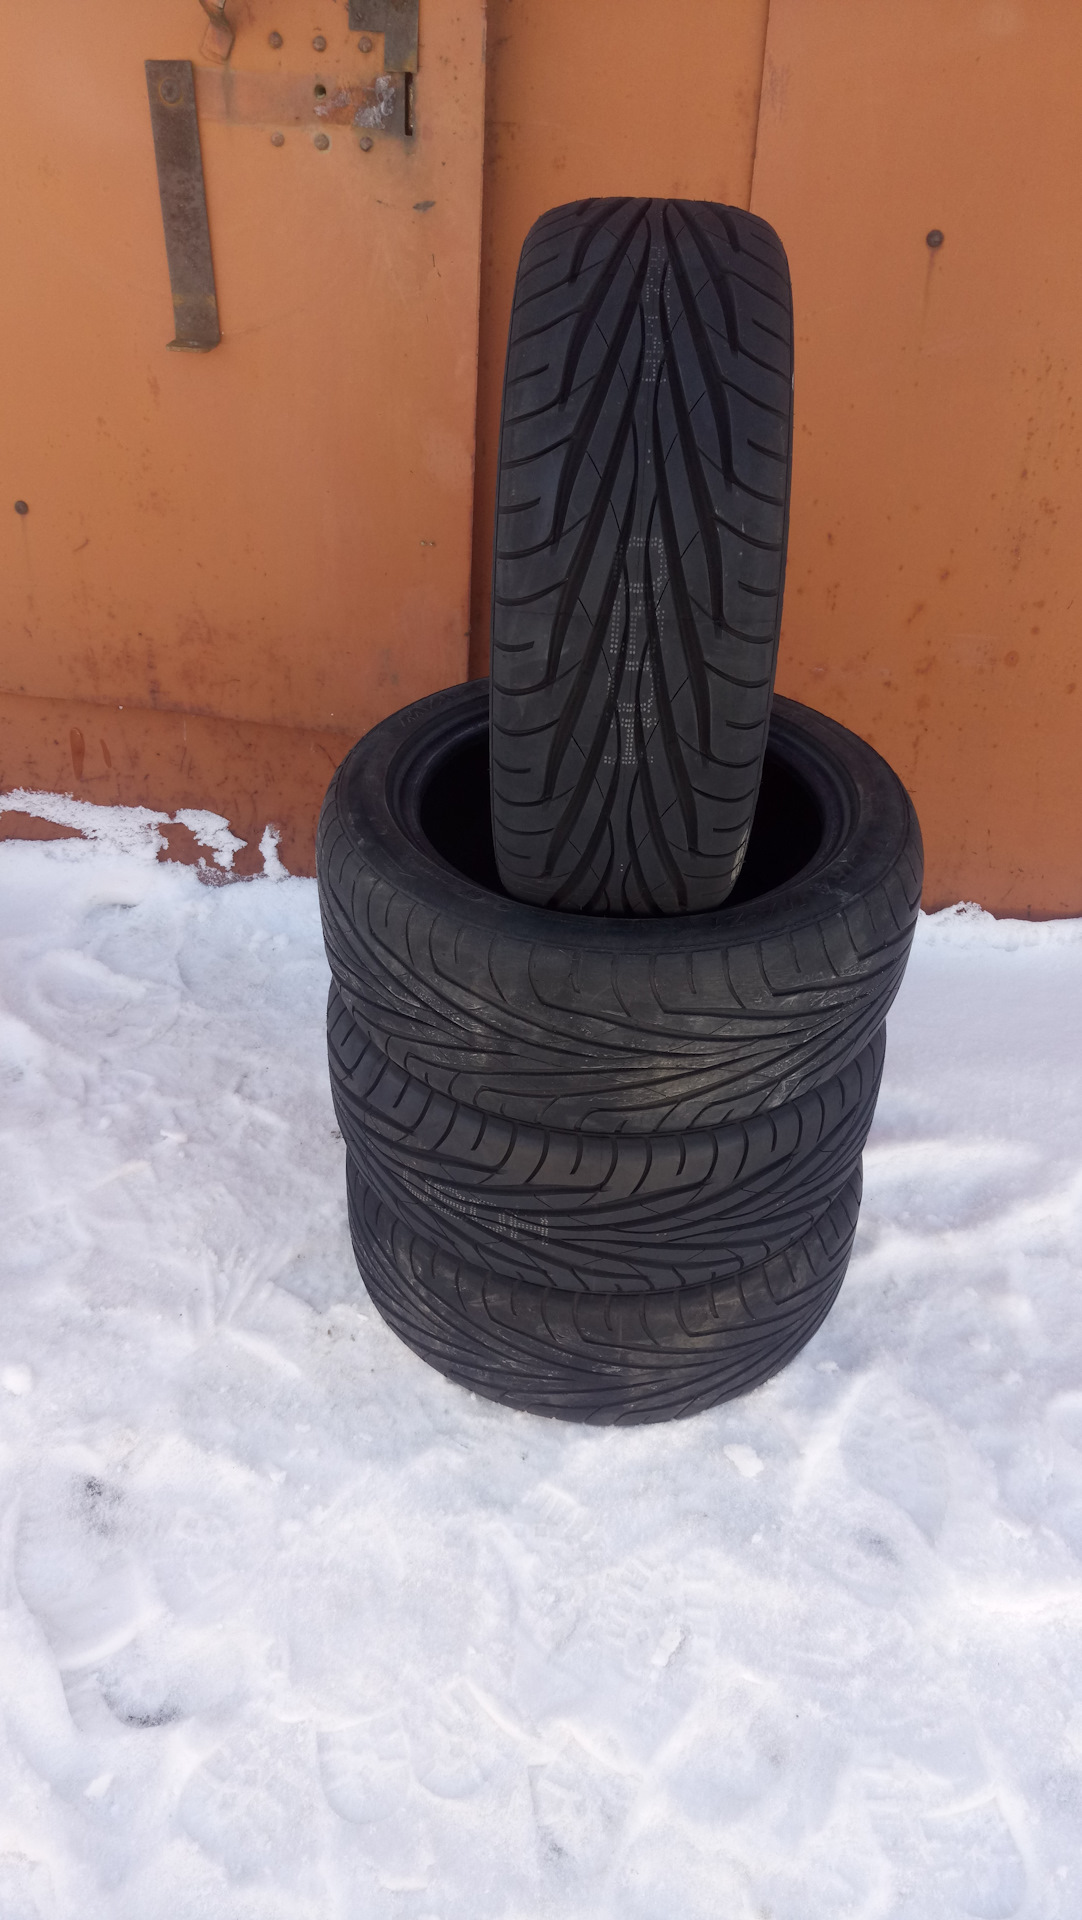 Шины максис виктра. Максис z1 Victra 195/50 r15. Maxxis шины r15 Victra. Maxxis ma-z1 Victra 195/55r15. 195/50 R15 Максис.